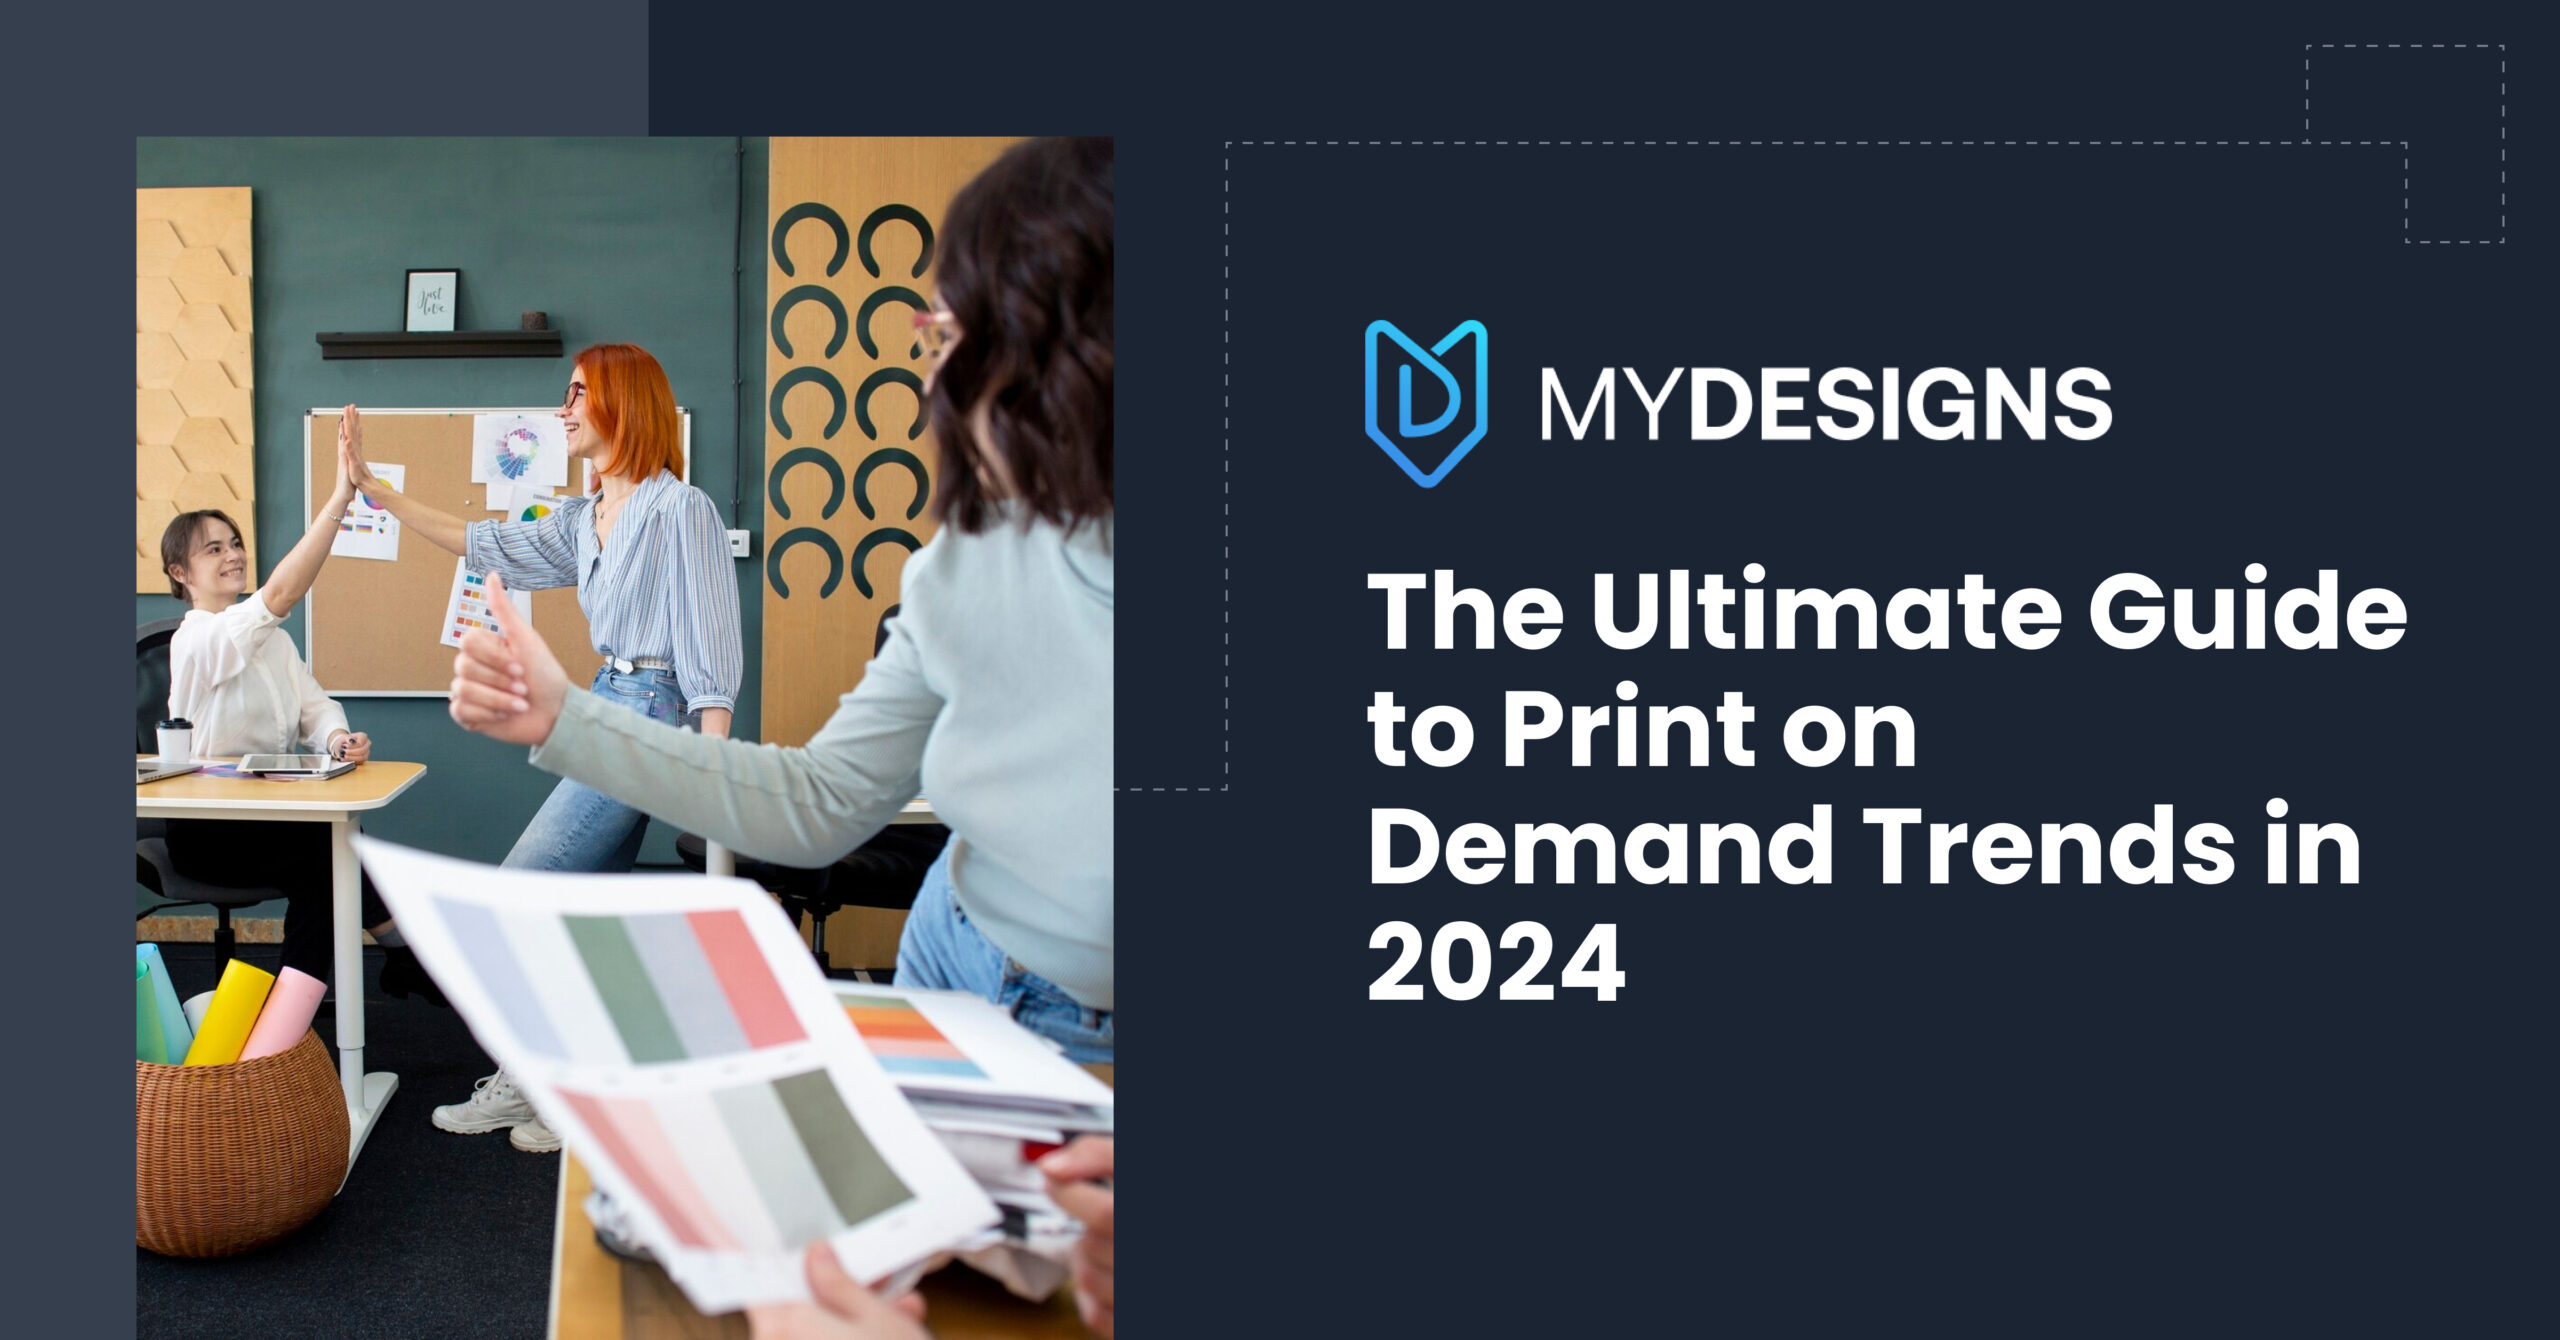 The Ultimate Guide to Print on Demand Trends in 2024 - MyDesigns